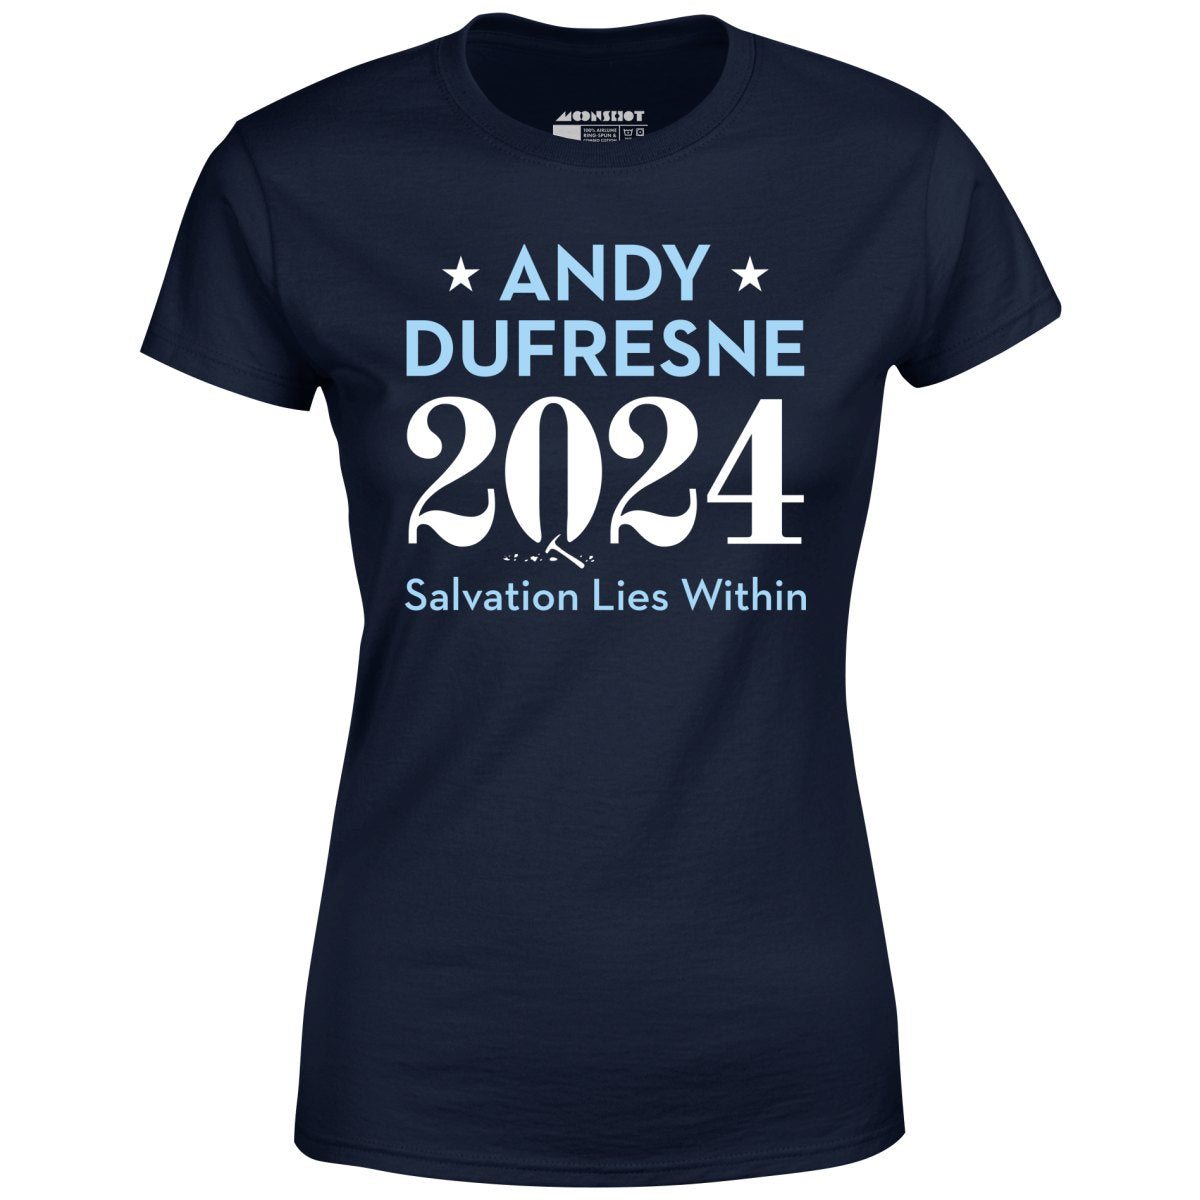 Andy Dufresne 2024 - Women's T-Shirt